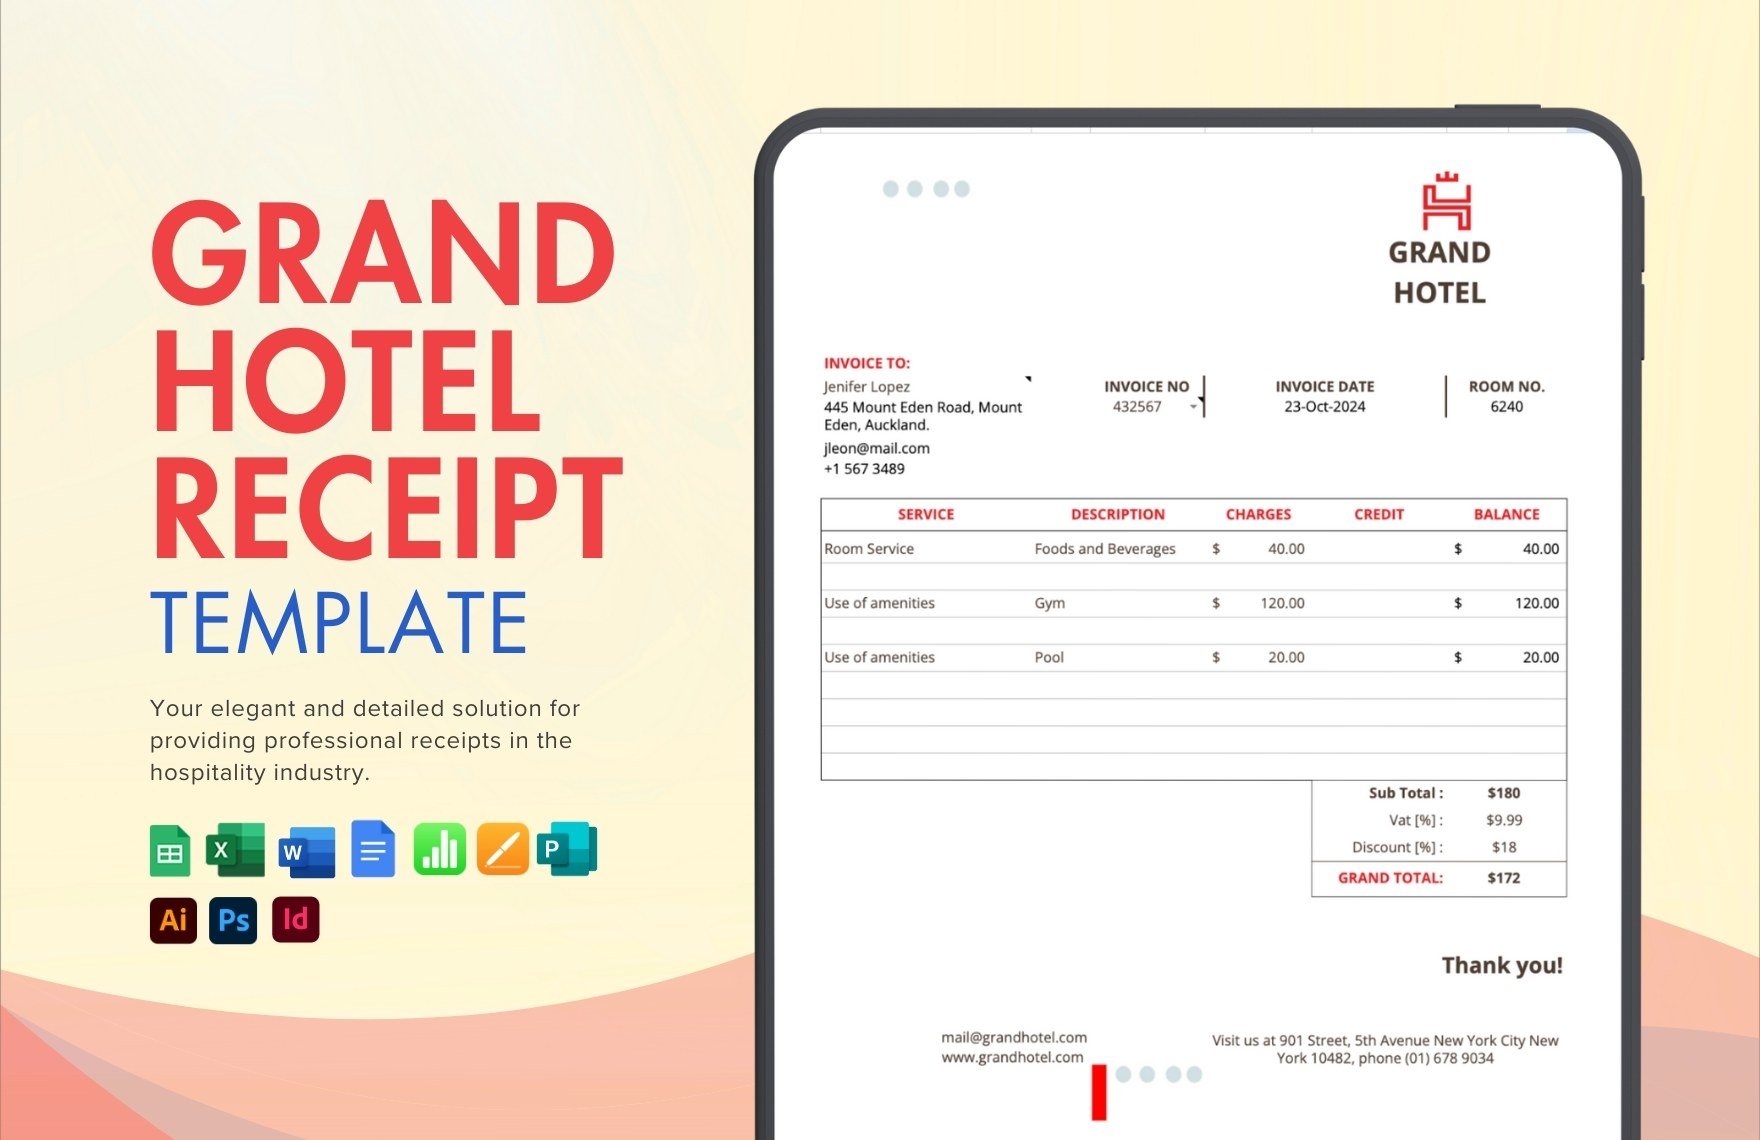 Free Grand Hotel Receipt Template in Word, Google Docs, Excel, Google Sheets, Illustrator, PSD, Apple Pages, Publisher, InDesign, Apple Numbers